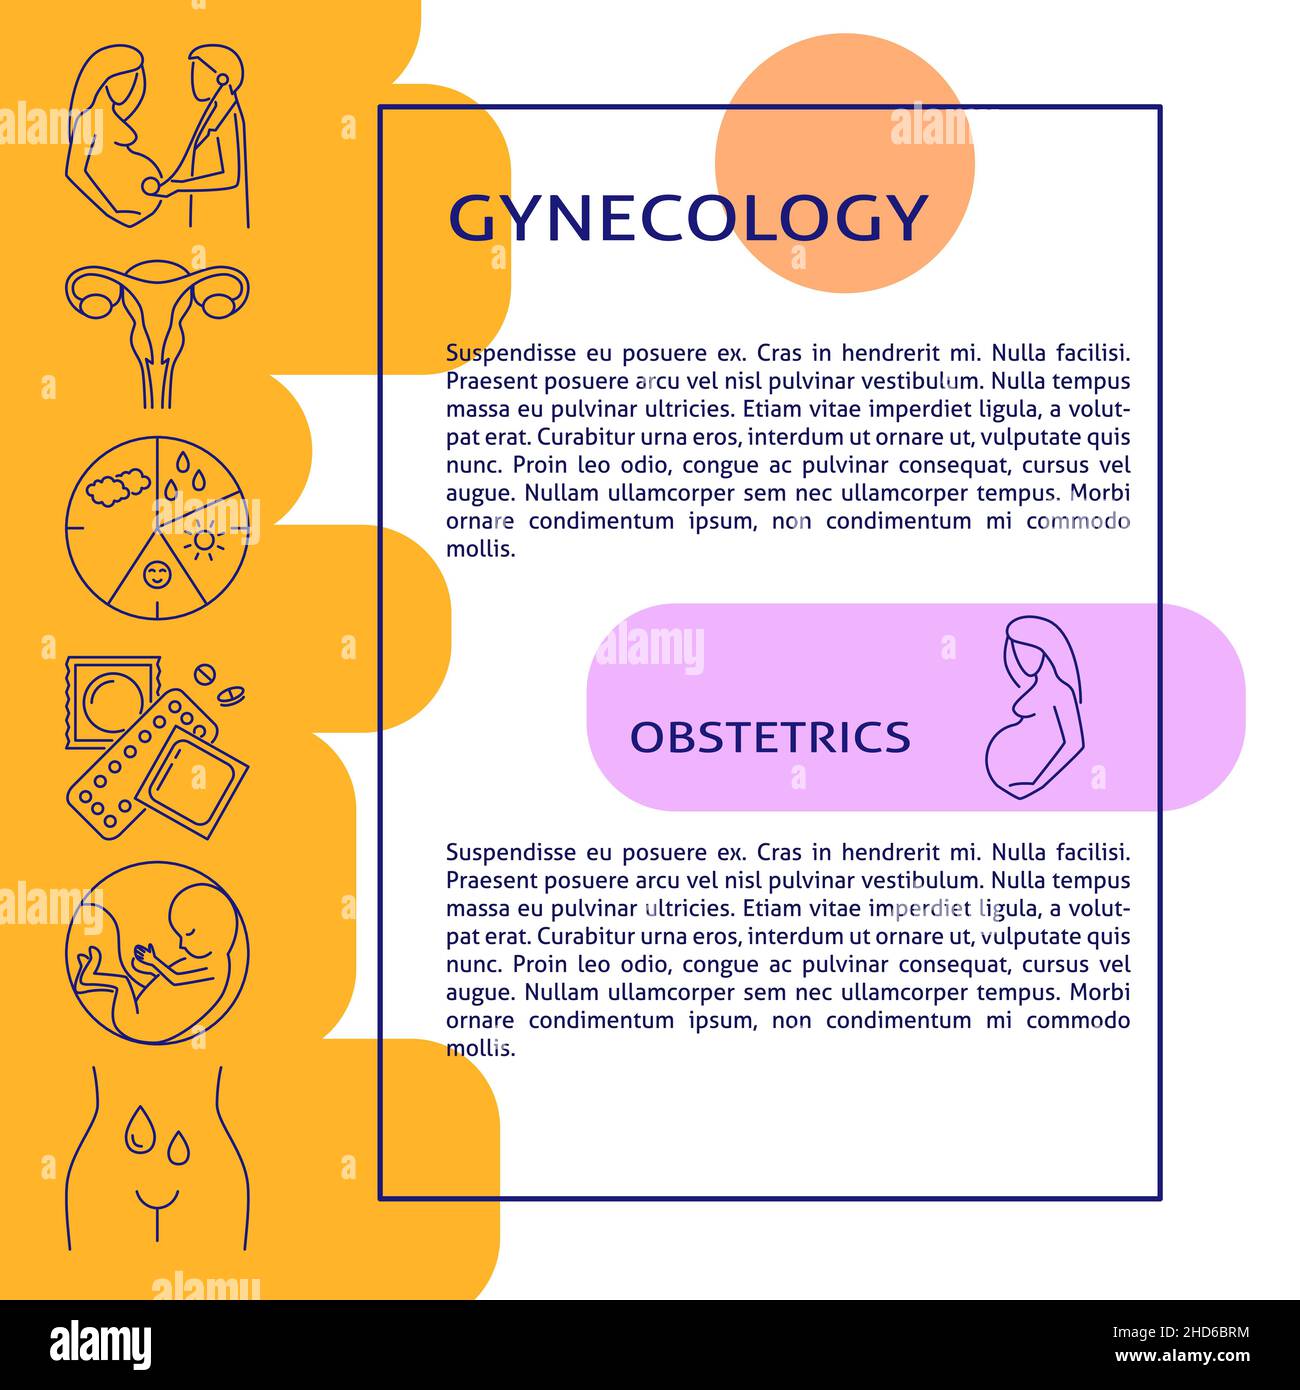 Gynecology banner template with text. Woman healthcare poster with symbols in line style. Vector illustration. Stock Vector